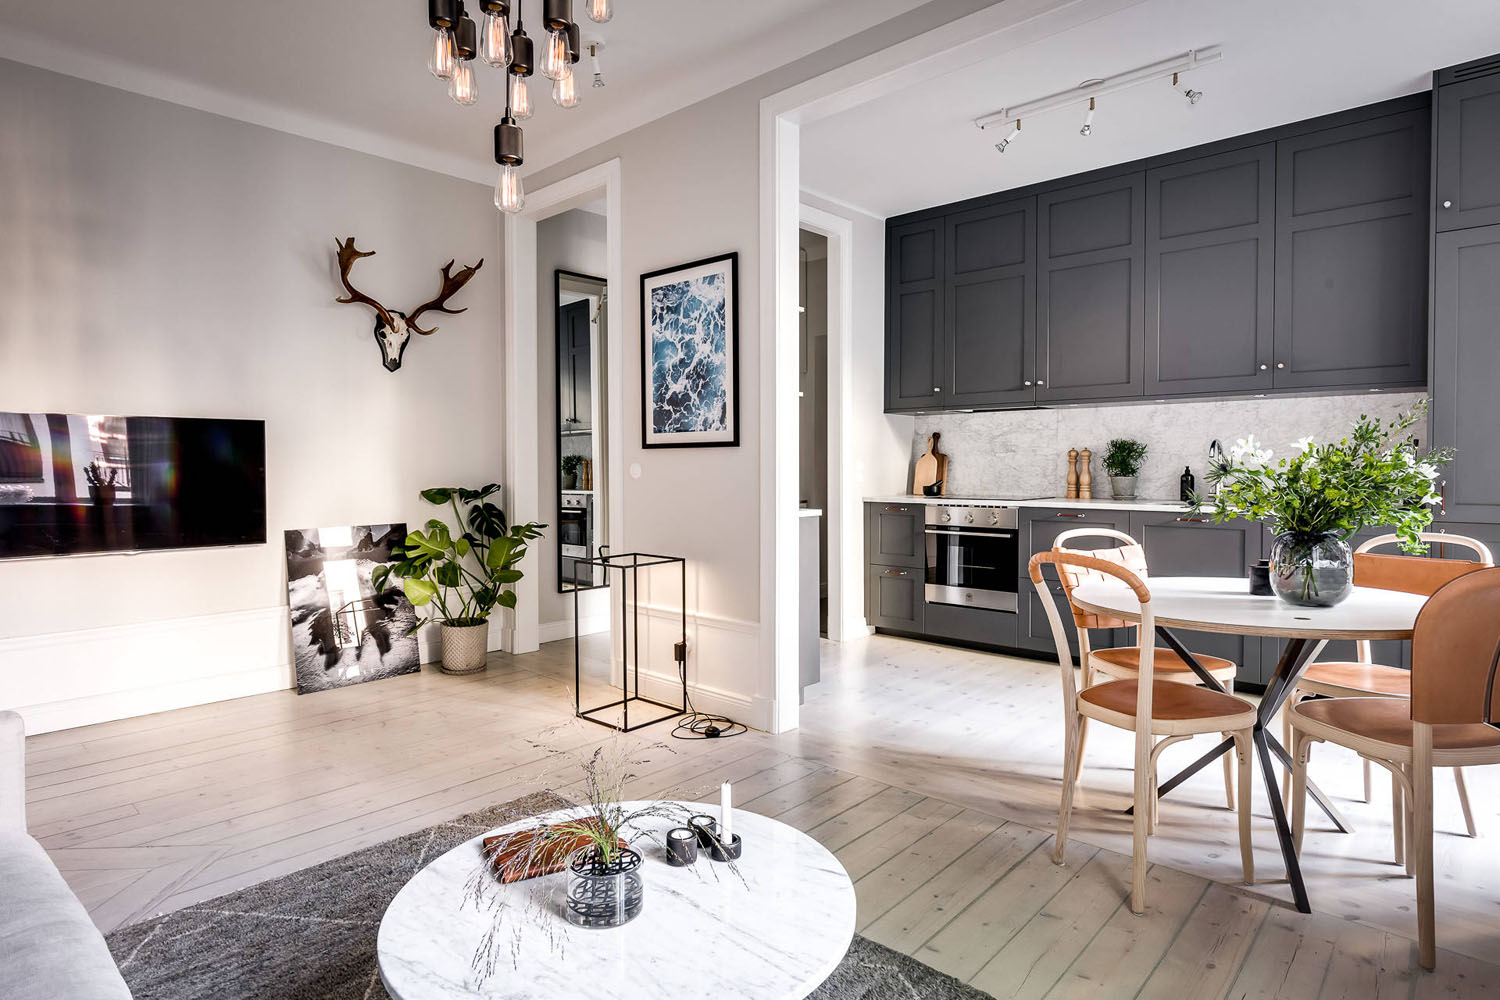 https://www.idesignarch.com/wp-content/uploads/Luxurious-Contemporary-Small-One-Bedroom-Apartment-Sweden_1.jpg